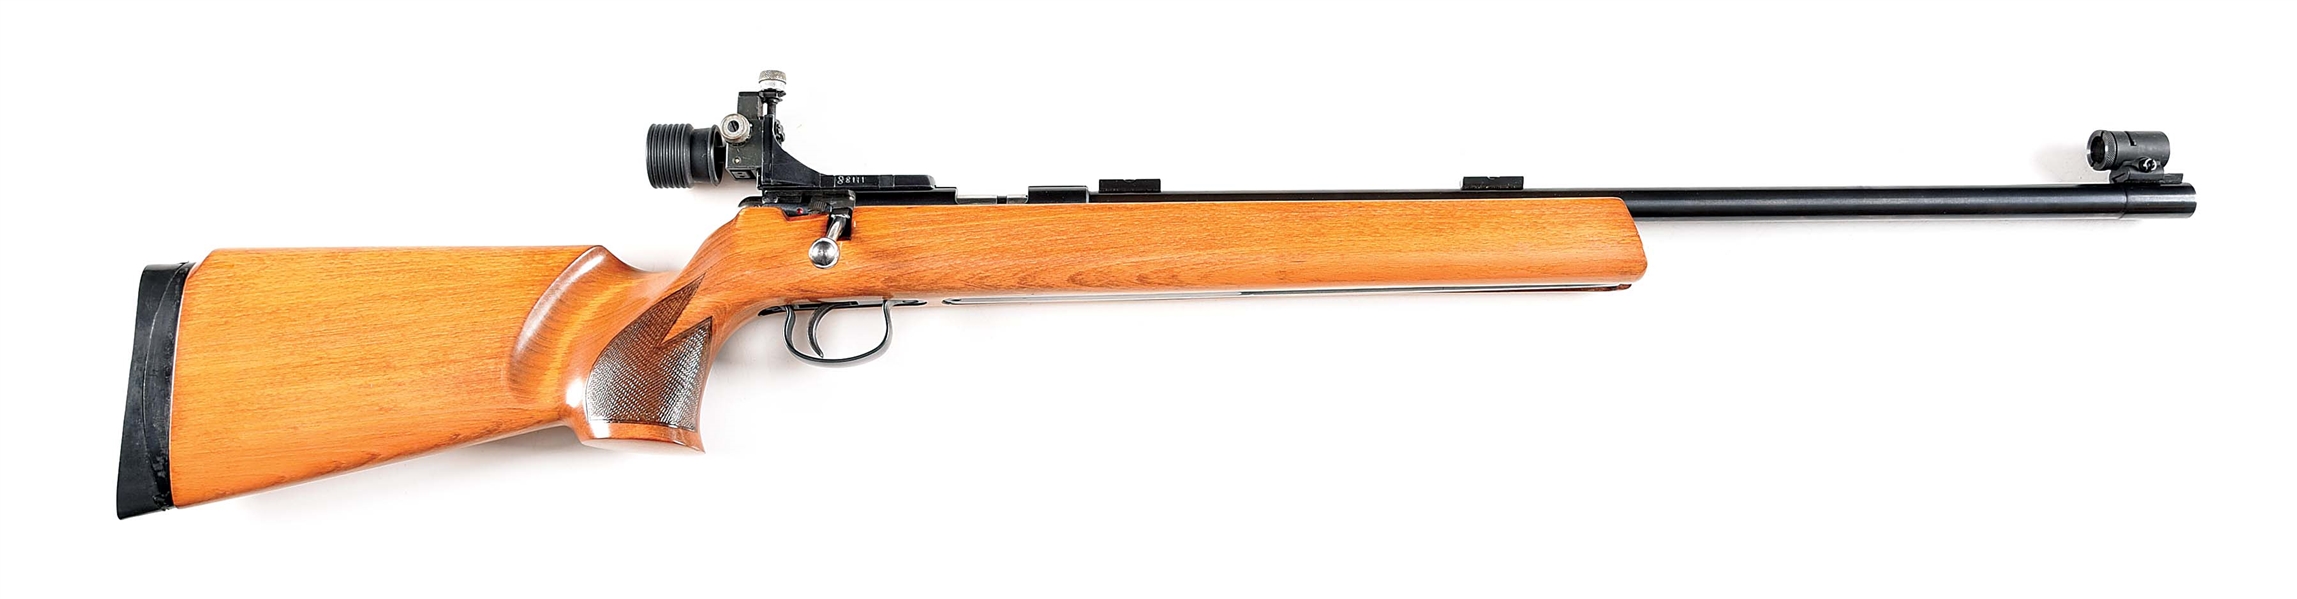 (M) ANSCHUTZ MODEL 64C BOLT ACTION RIFLE IMPORTED BY SAVAGE. 